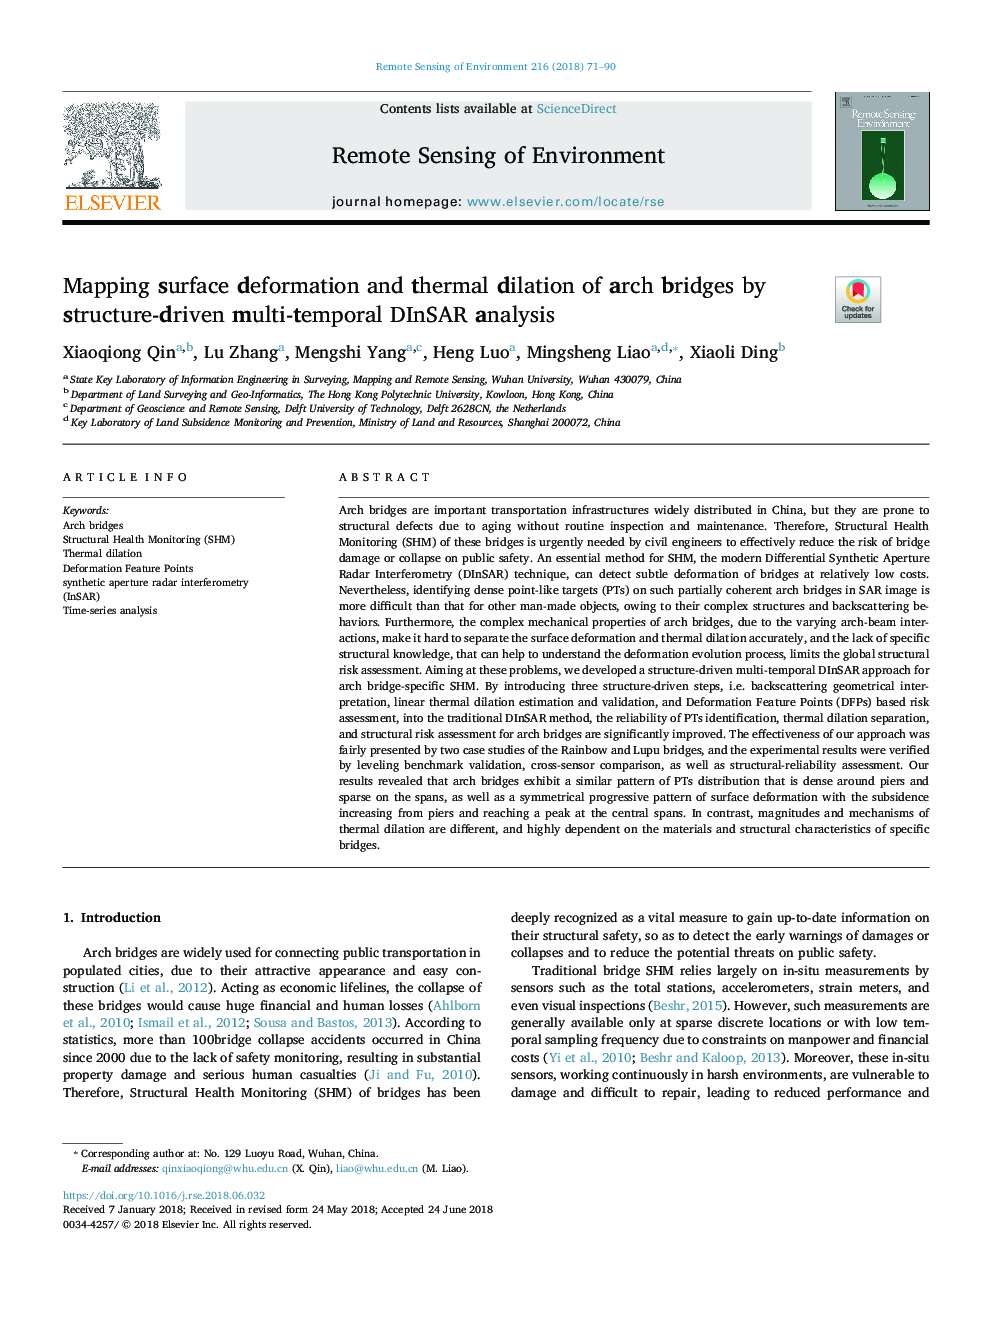 Mapping surface deformation and thermal dilation of arch bridges by structure-driven multi-temporal DInSAR analysis